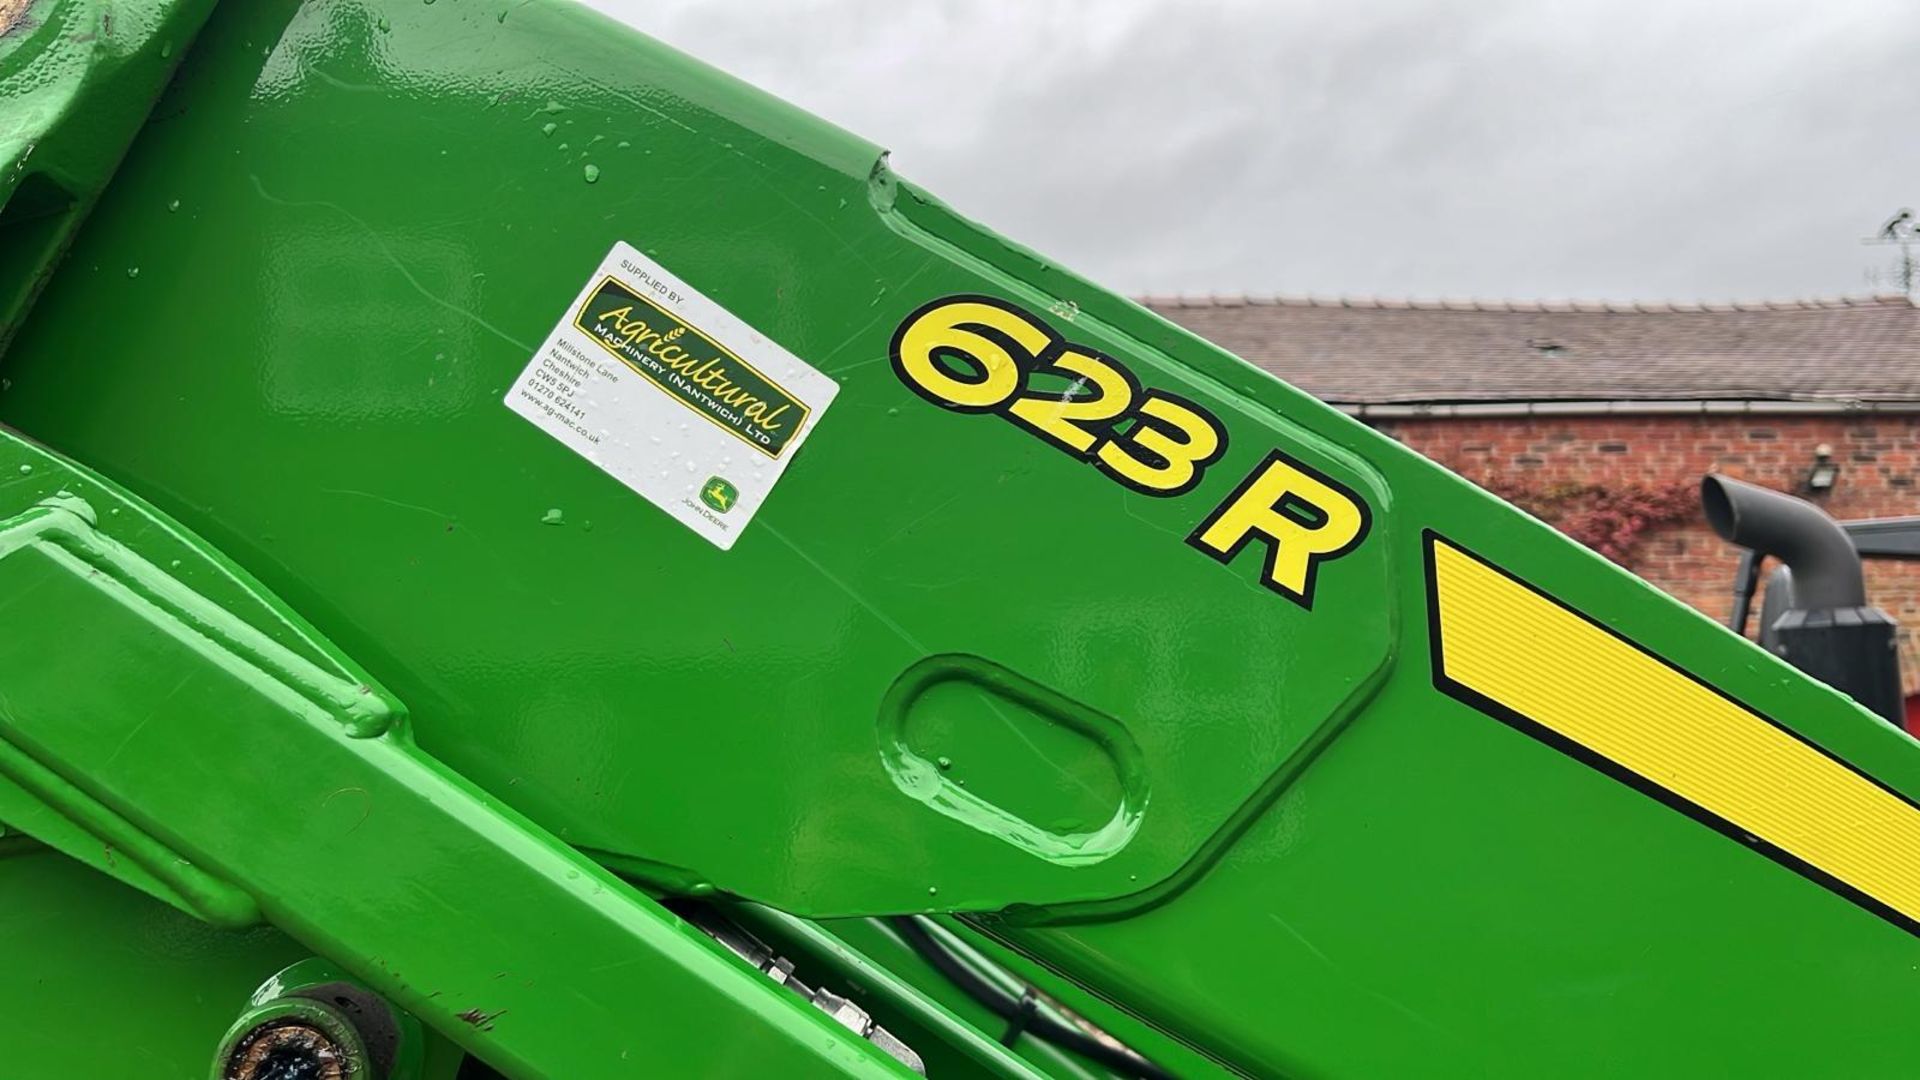 2019 JOHN DEERE 6115RC TRACTOR PE19HBL 115 HP WITH JOHN DEERE 623R FRONT LOADER 1279 HOURS AT - Image 24 of 35